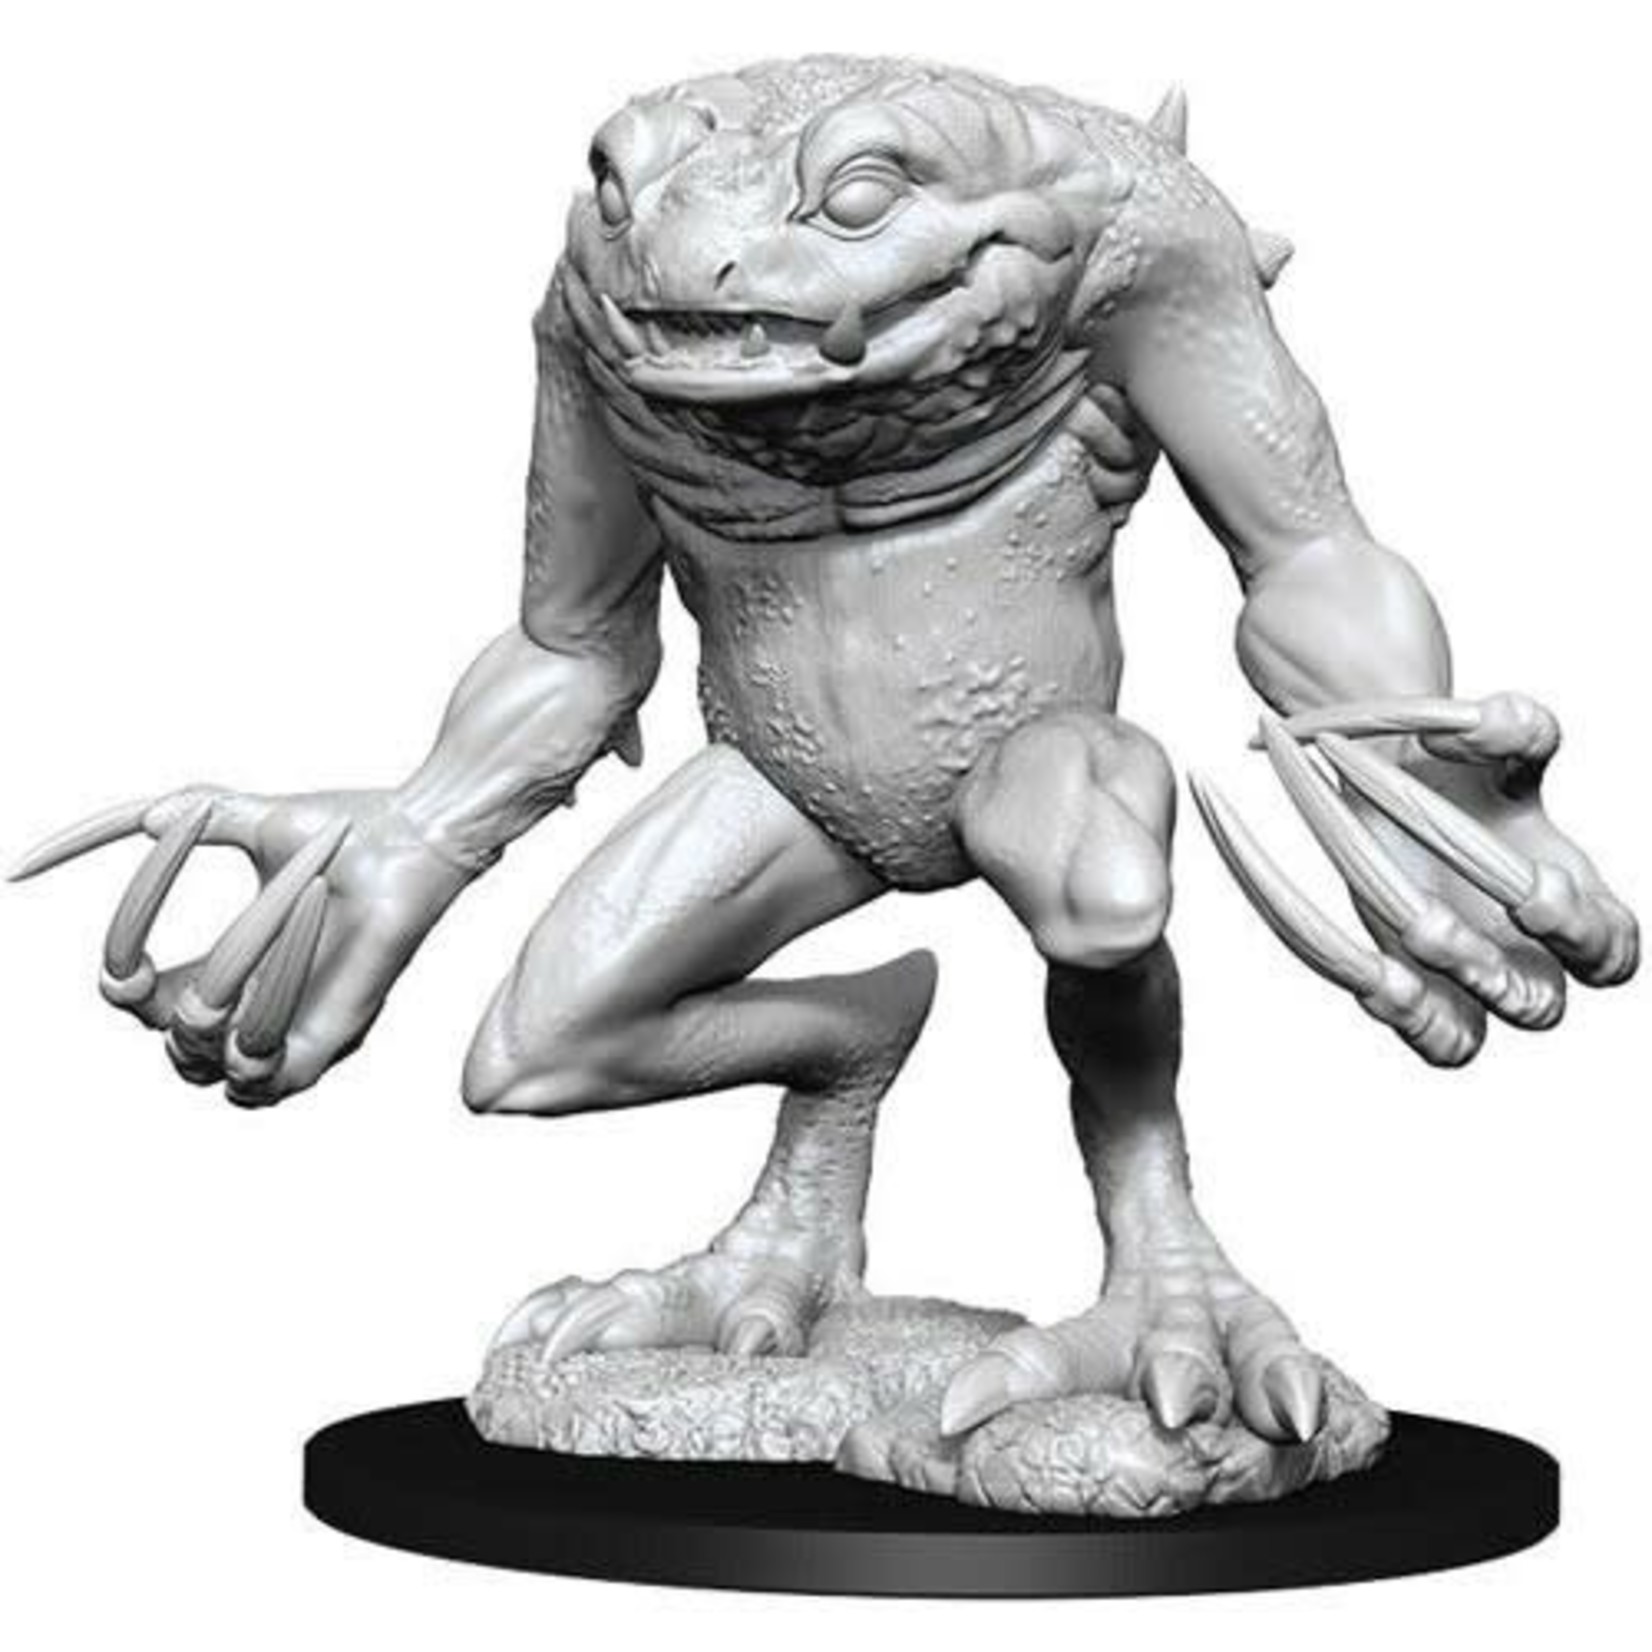 WizKids Dungeons and Dragons Nolzur's Marvelous Minis Red Slaad